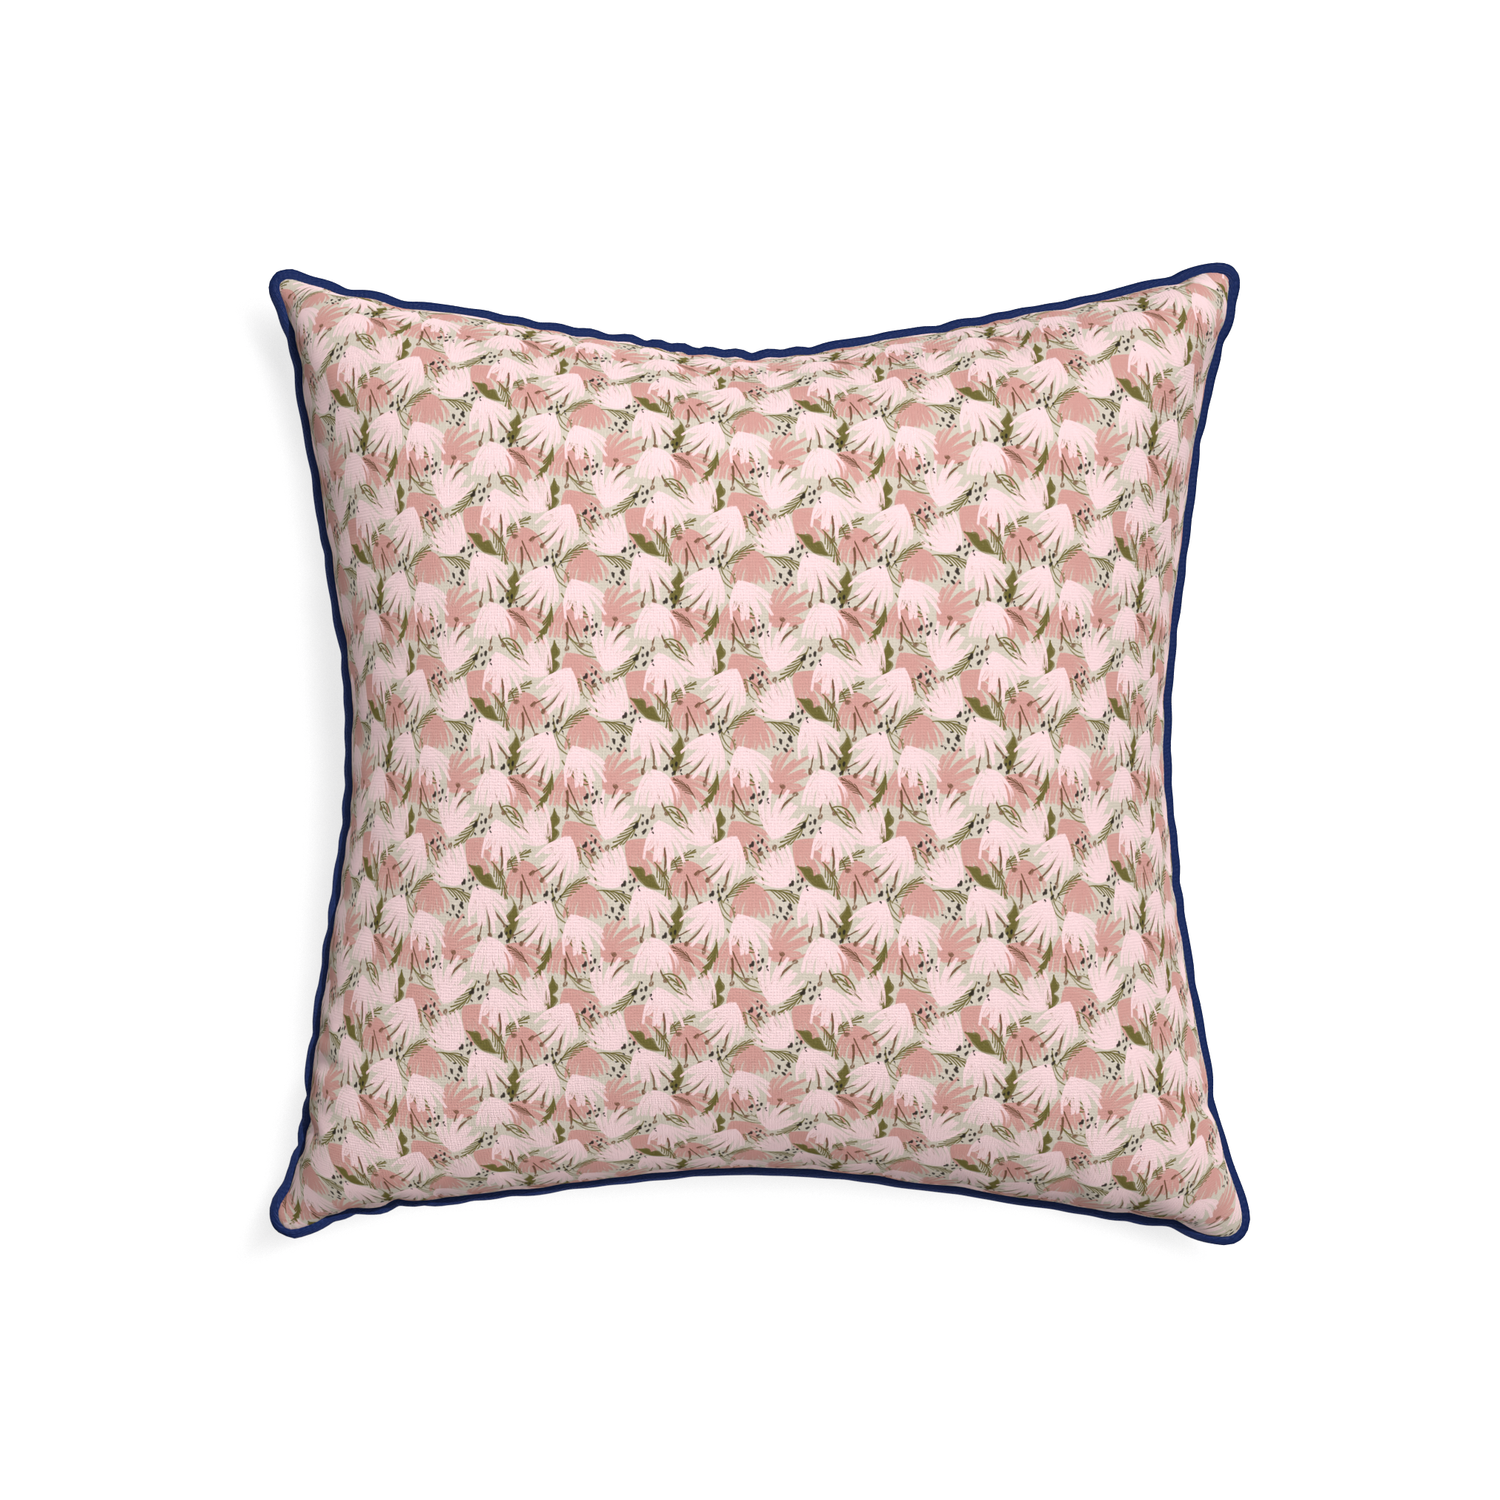 22-square eden pink custom pillow with midnight piping on white background